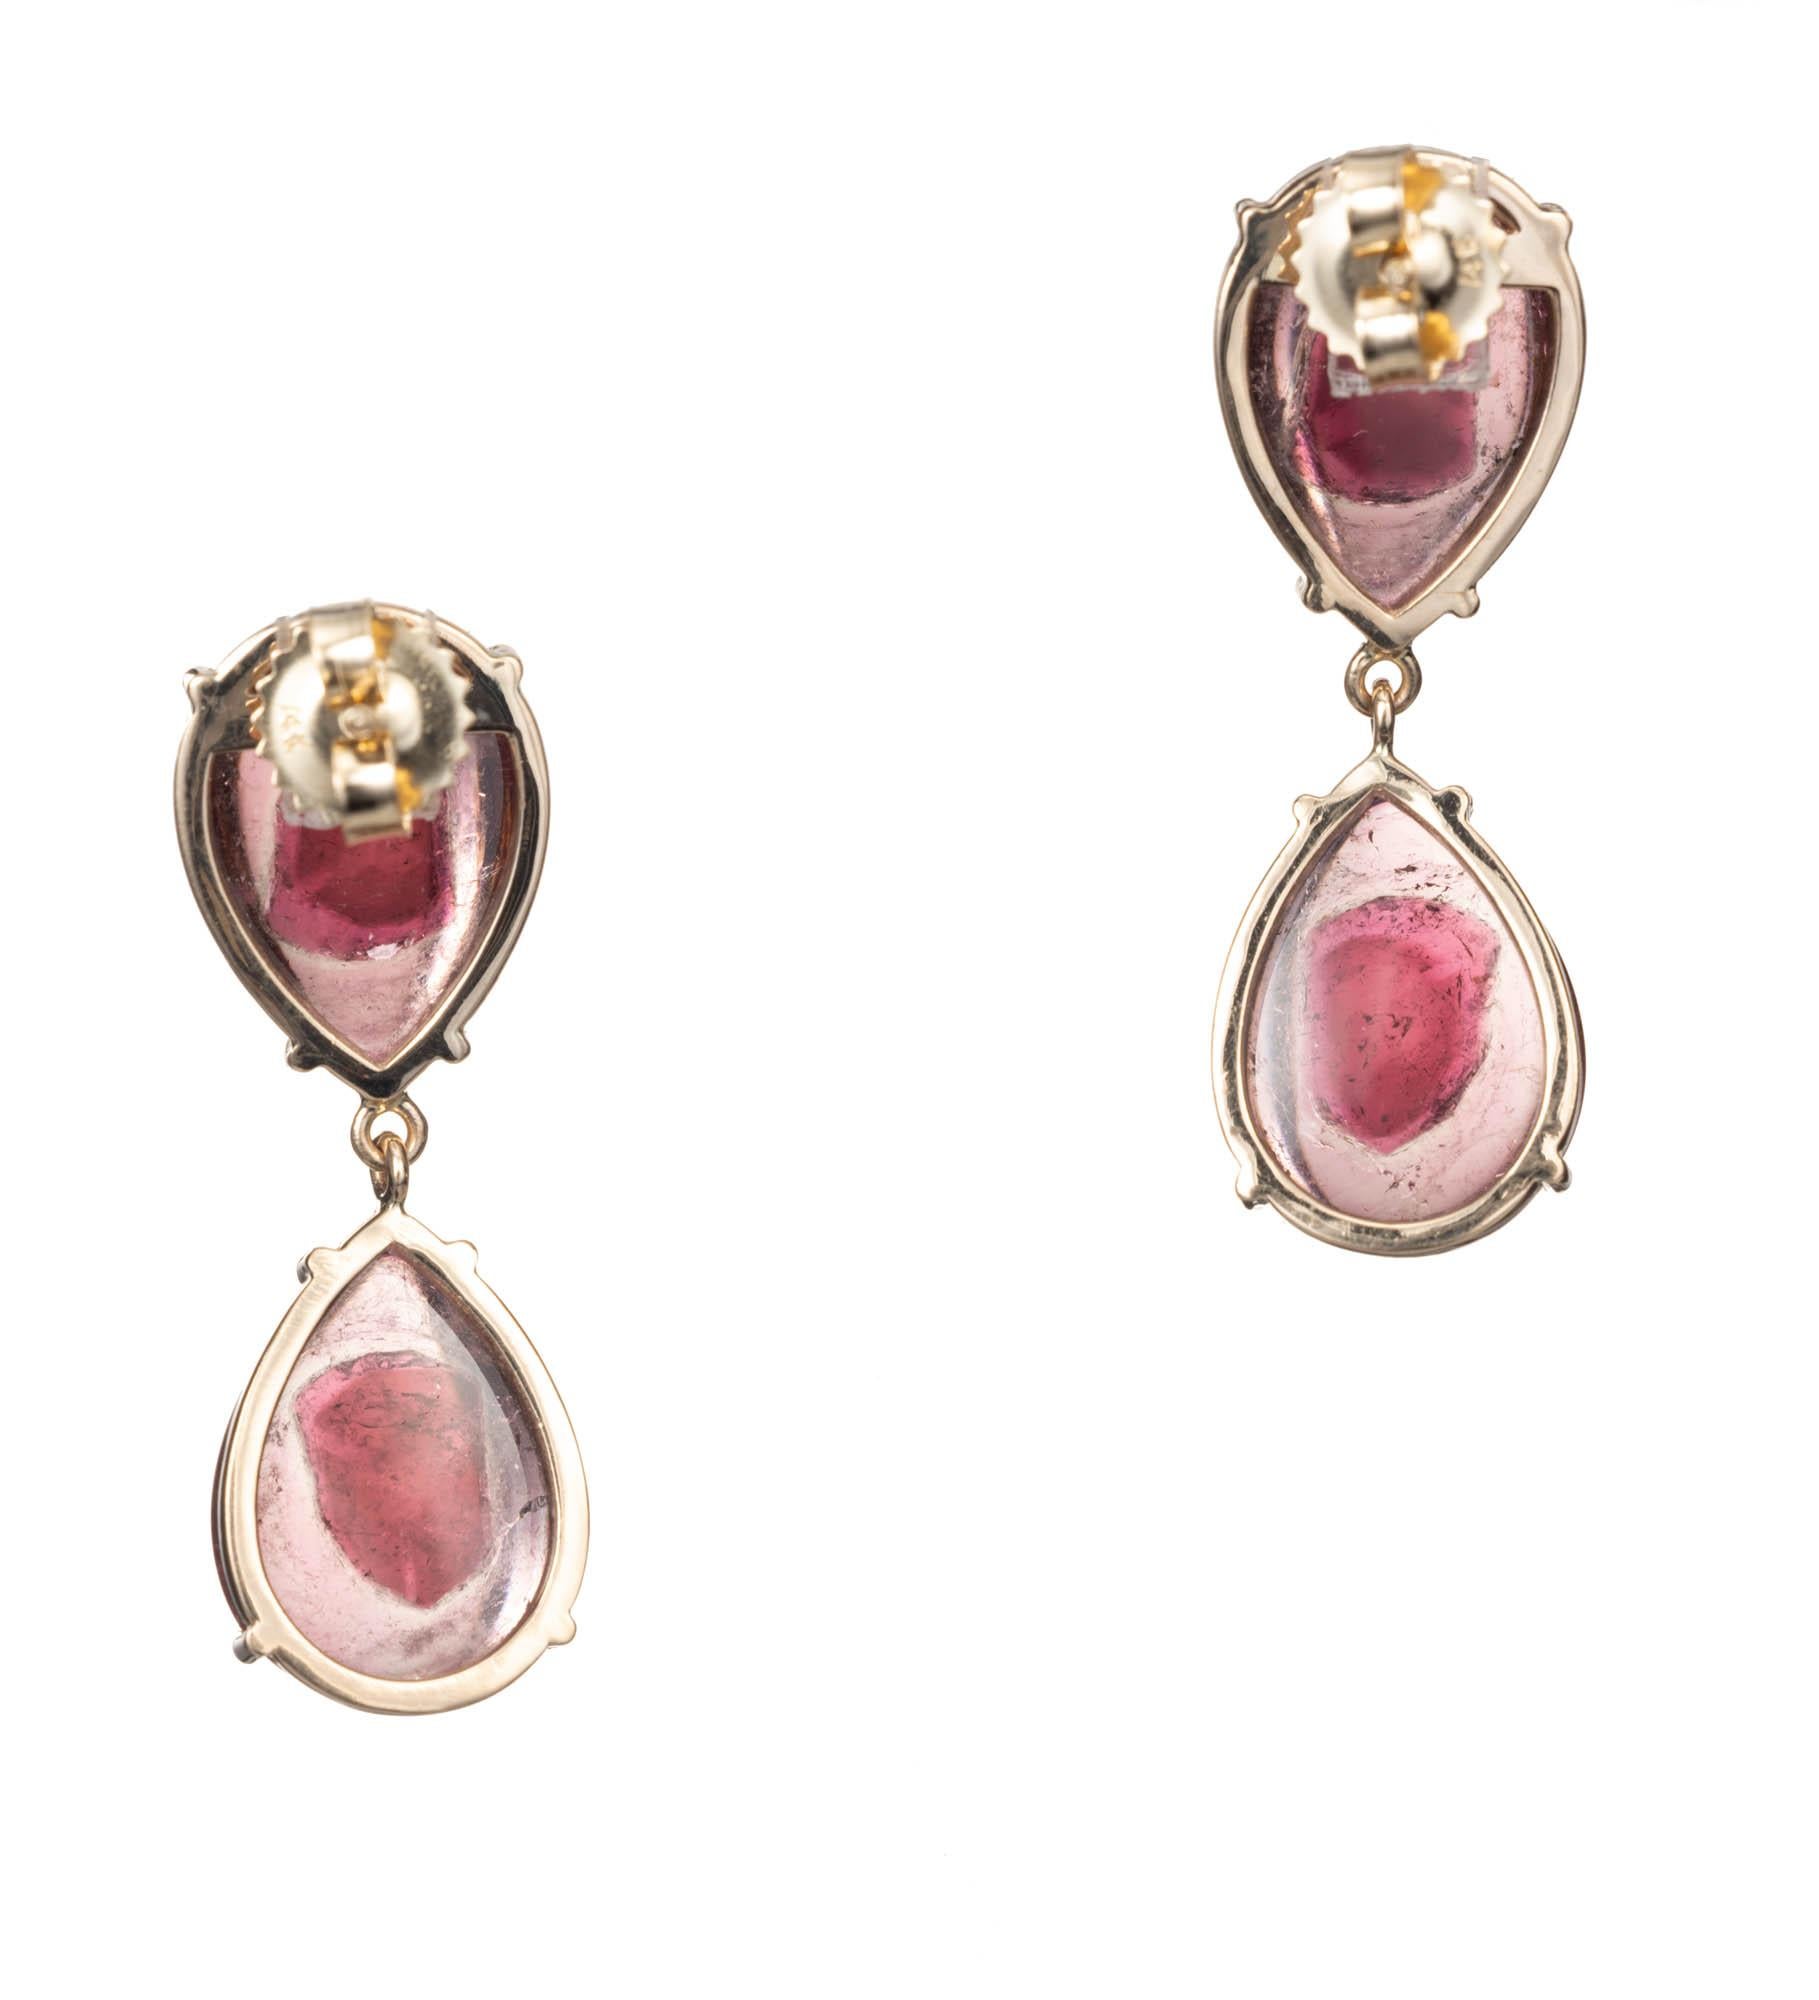  21.36ct pear cabochon Tourmaline 14k yellow gold dangle earrings. 

4 pear pink cabochon Tourmaline, approx. total weight 21.36cts, 15 x 11mm 
14k yellow gold 
Tested and stamped: 14k
9.3 grams 
Top to bottom: 34.56mm or 1.36 inches 
Width:11.74mm